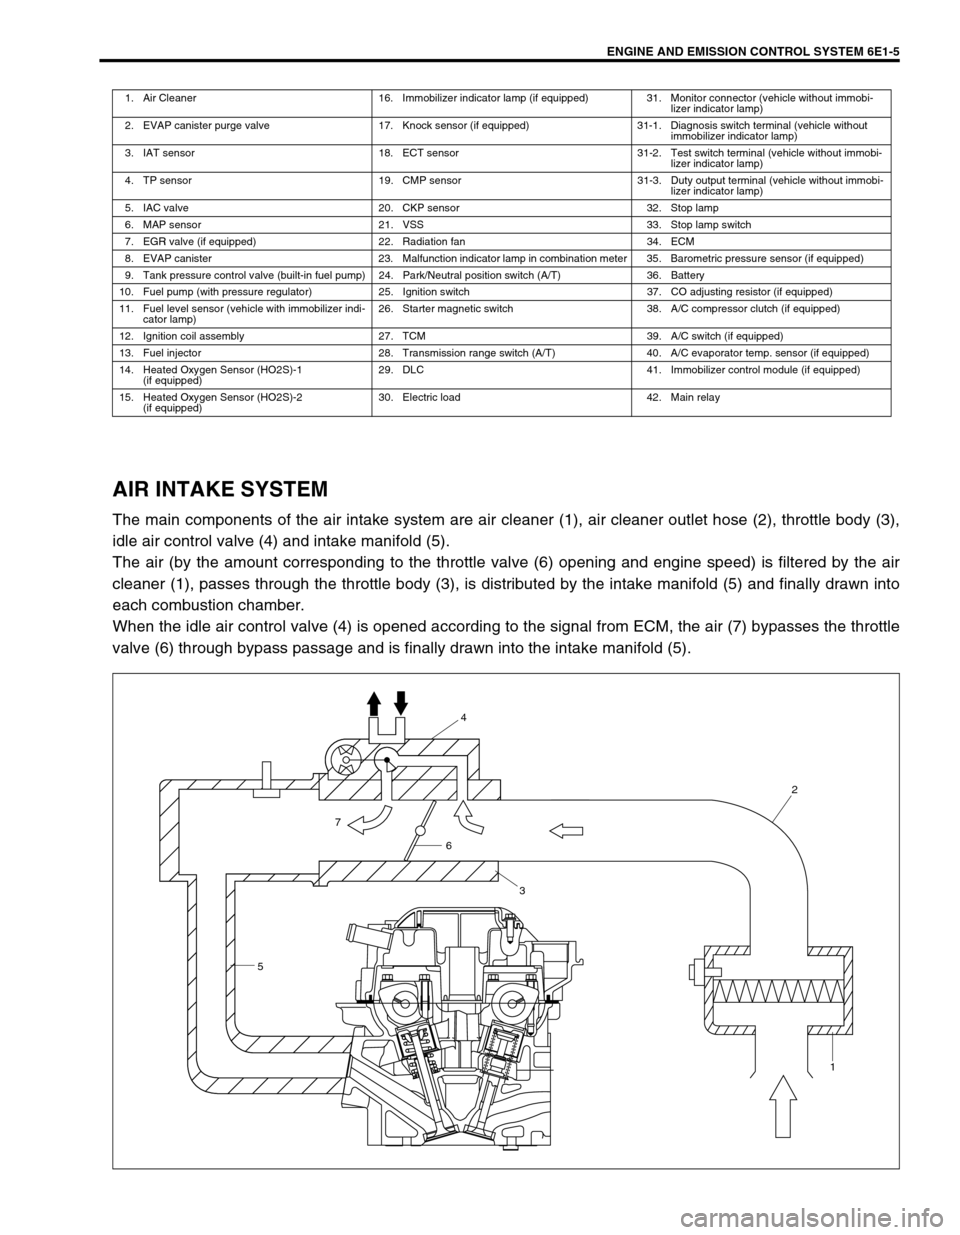 SUZUKI SWIFT 2000 1.G RG413 Service Service Manual ENGINE AND EMISSION CONTROL SYSTEM 6E1-5
AIR INTAKE SYSTEM
The main components of the air intake system are air cleaner (1), air cleaner outlet hose (2), throttle body (3),
idle air control valve (4) 